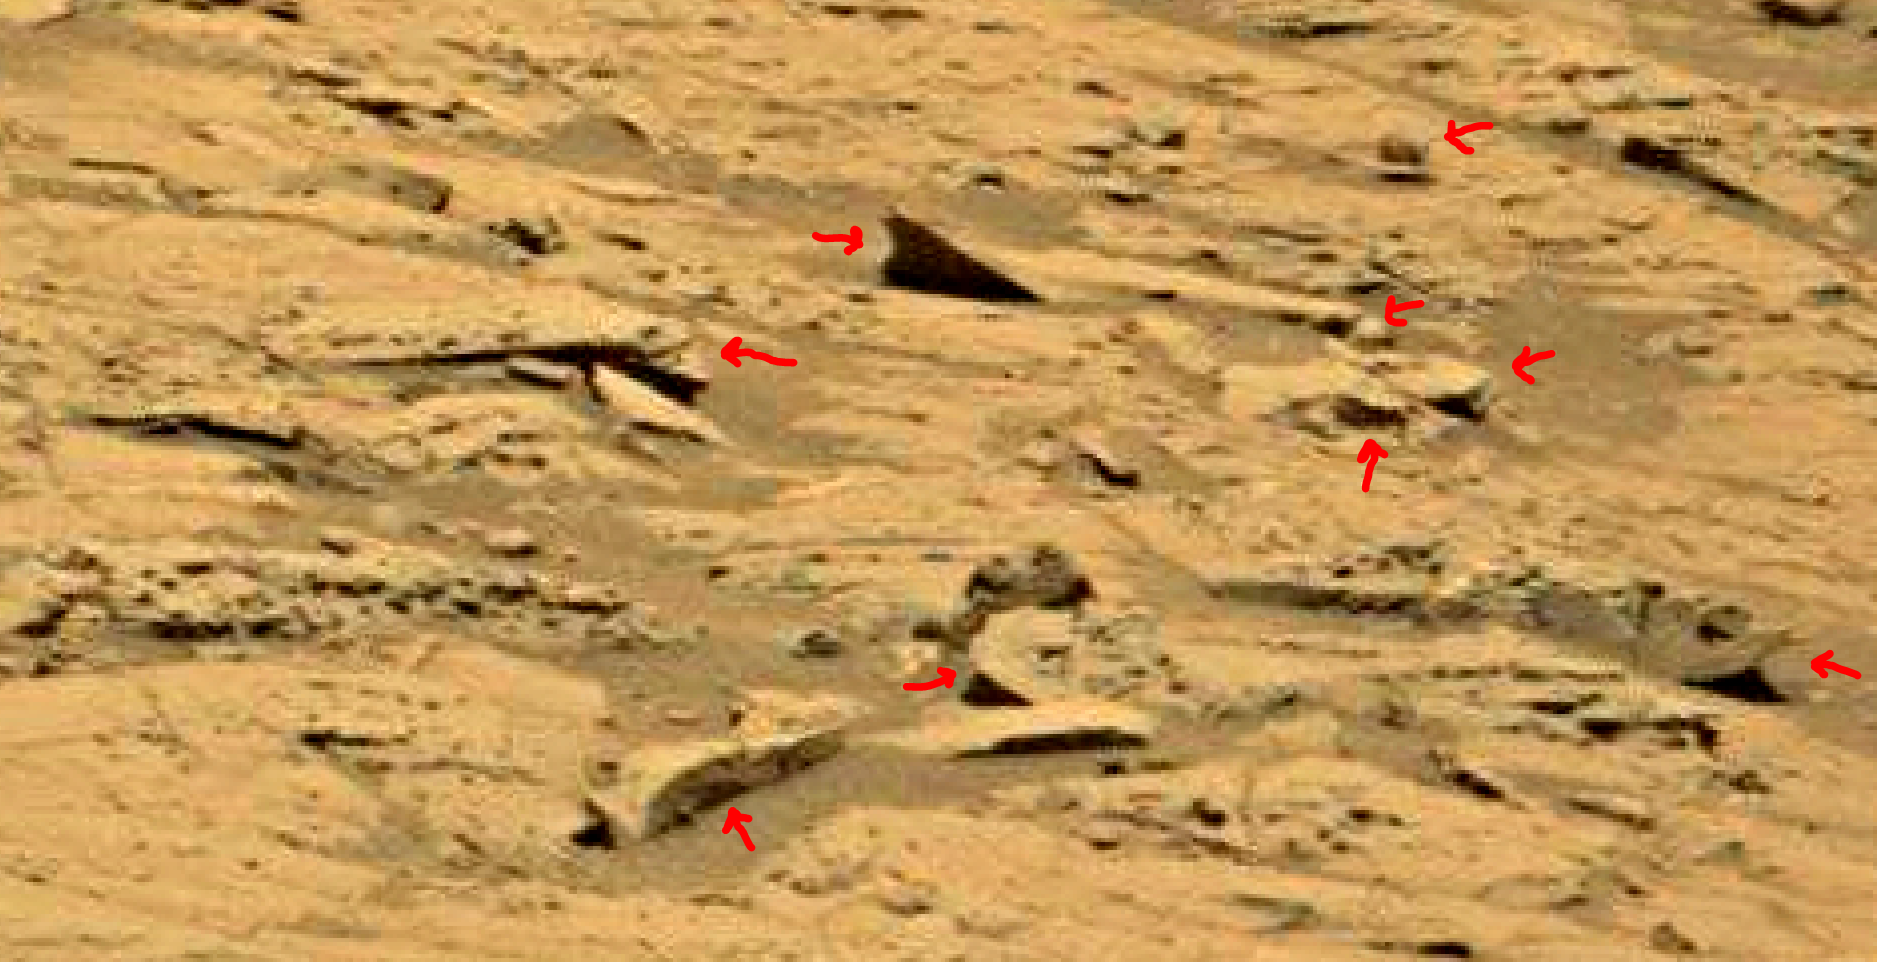 mars sol 1353 anomaly-artifacts 59 was life on mars